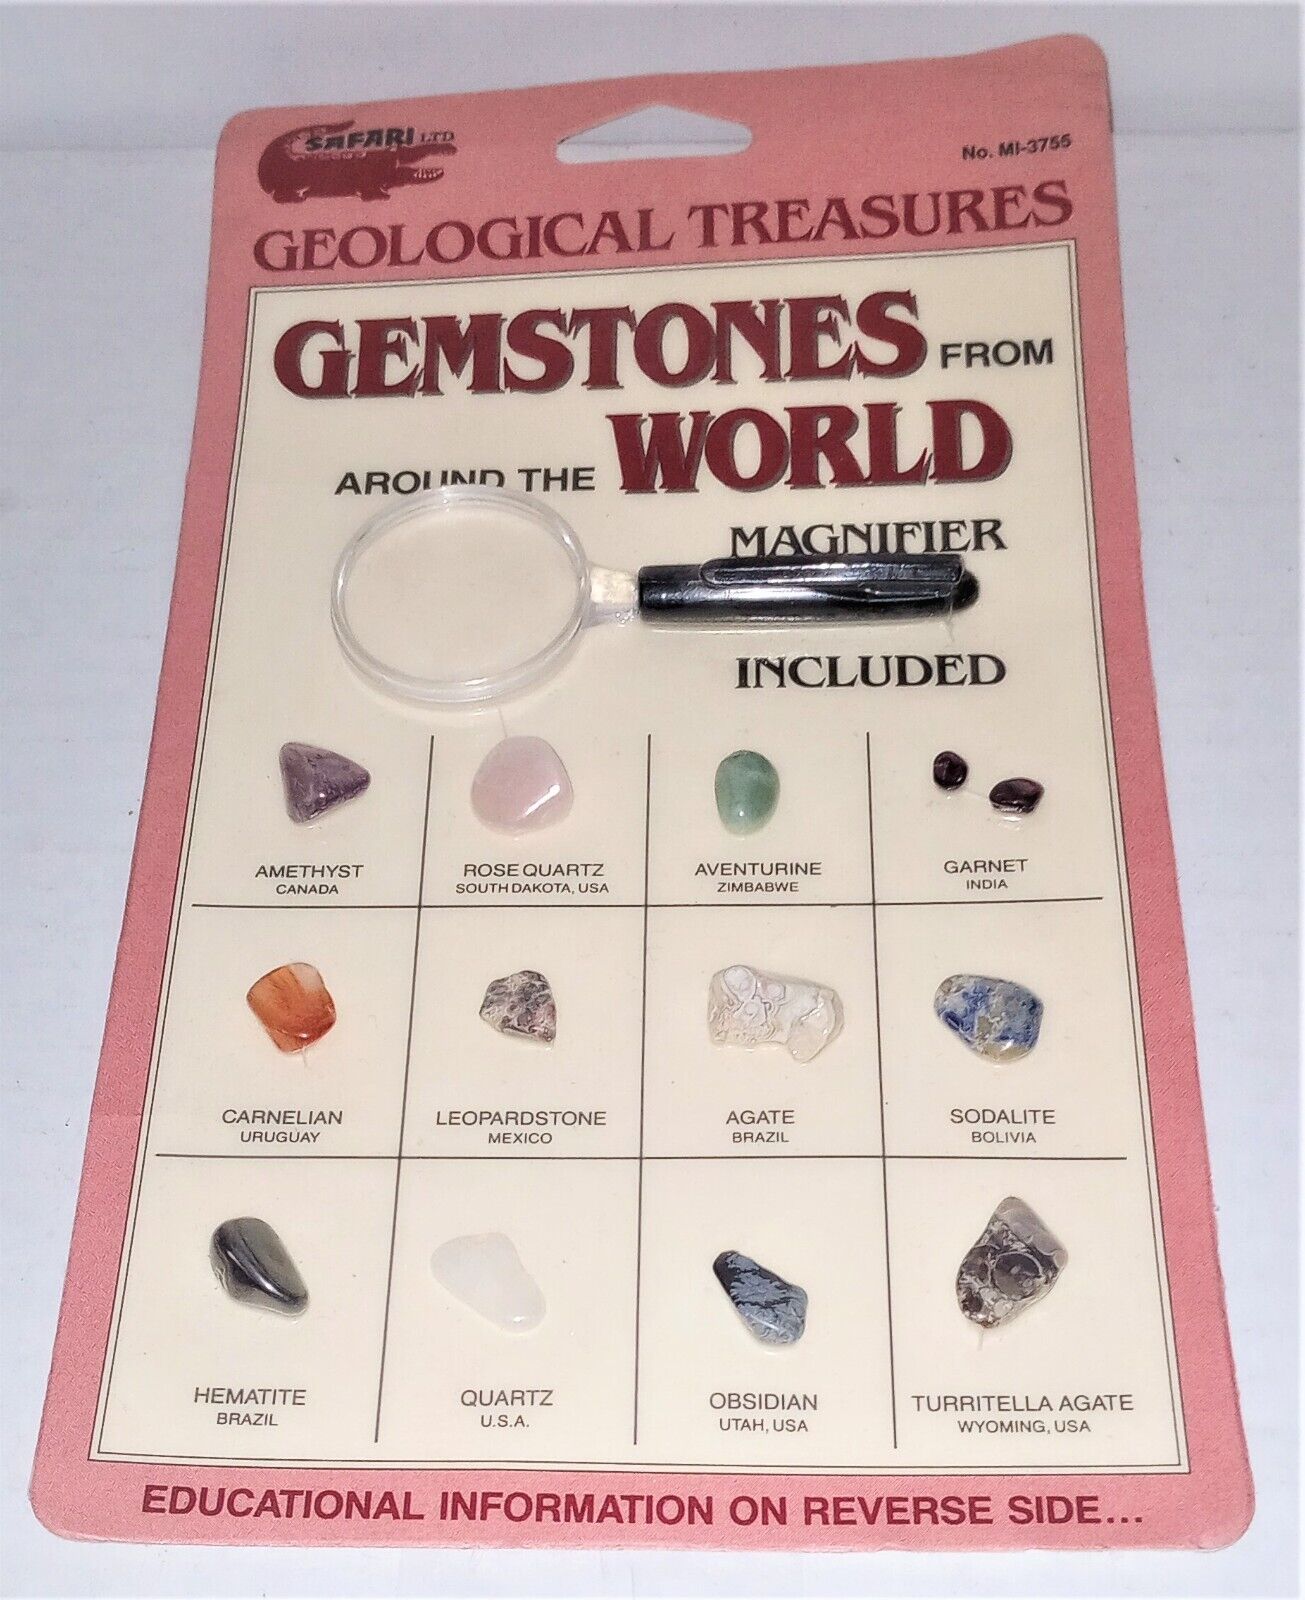 Geological Treasures - Gem Stones from Around the World with Magnifier - New